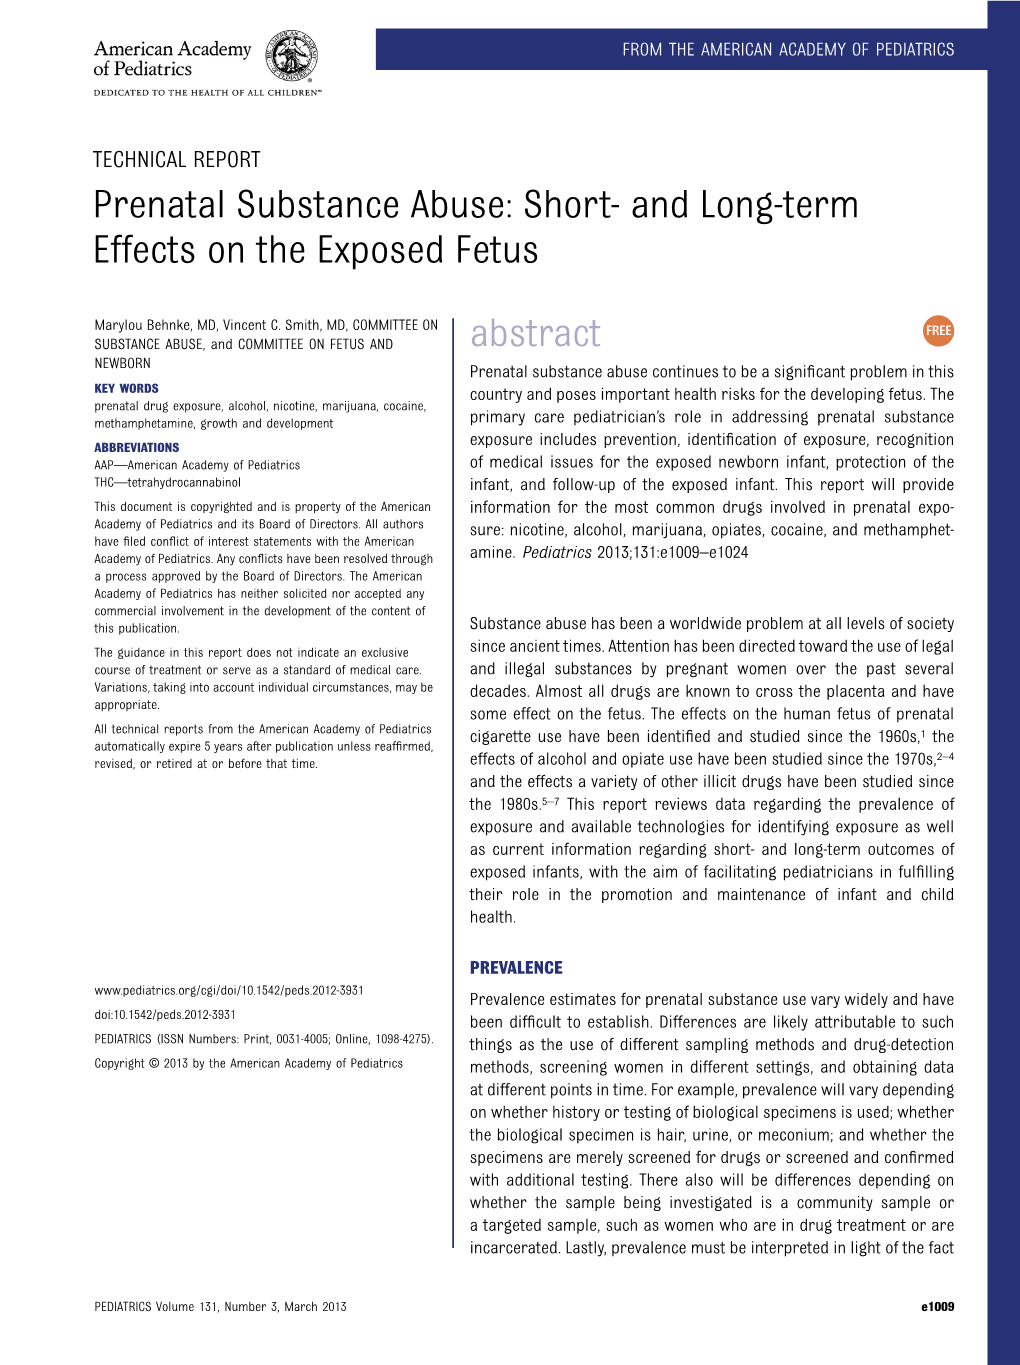 Prenatal Substance Abuse: Short- and Long-Term Effects on the Exposed Fetus